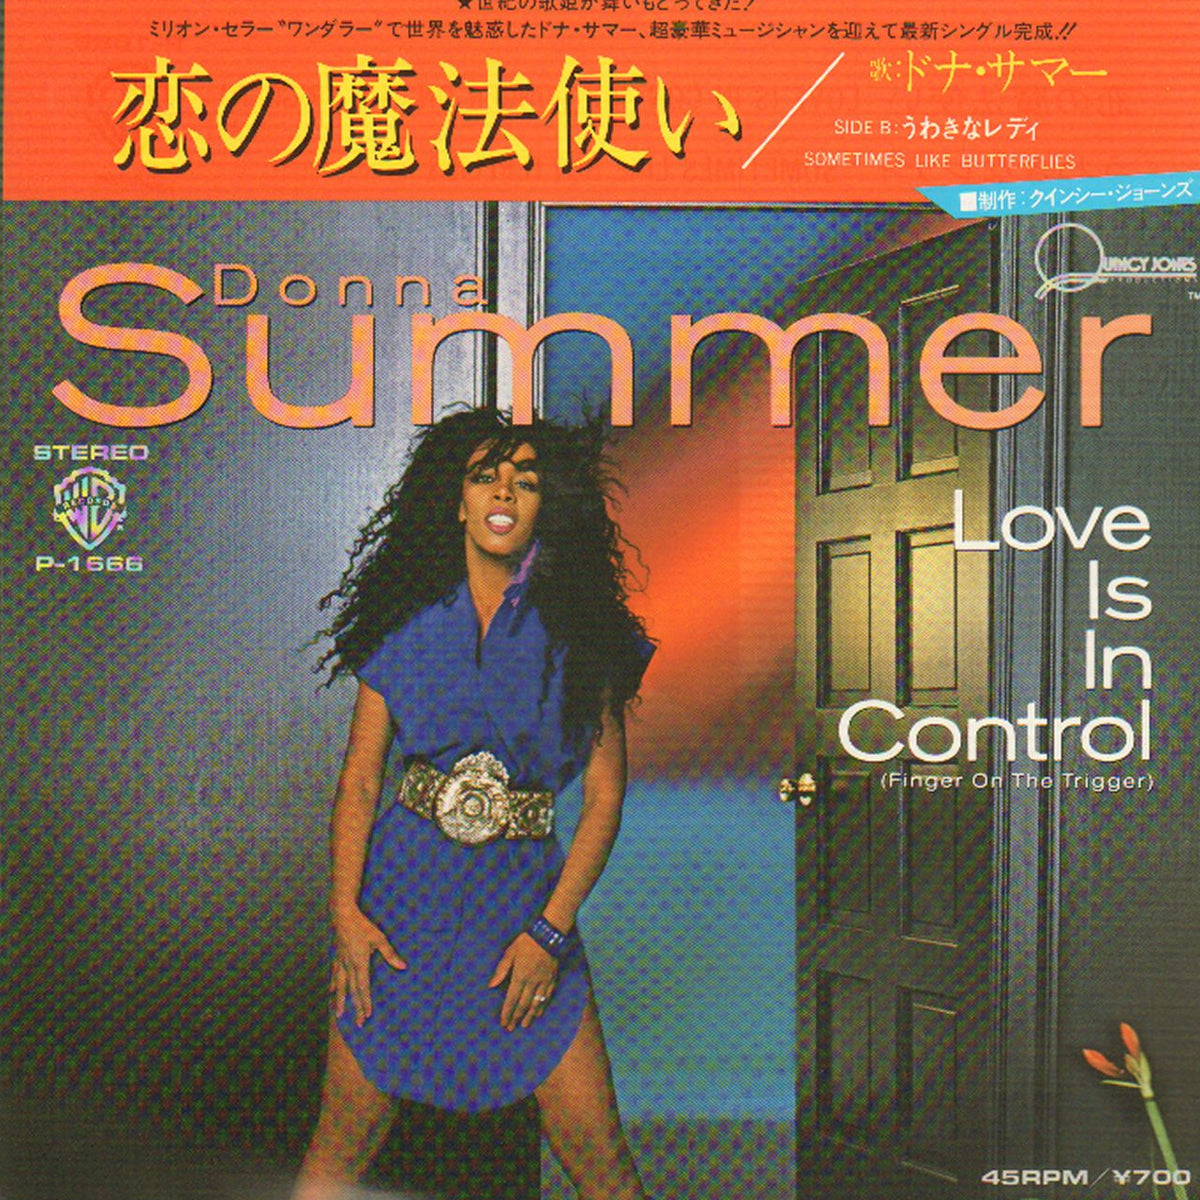 Is　Donna　Summer　On　(Finger　Trigger)　Control　Love　—　In　The　White　Label